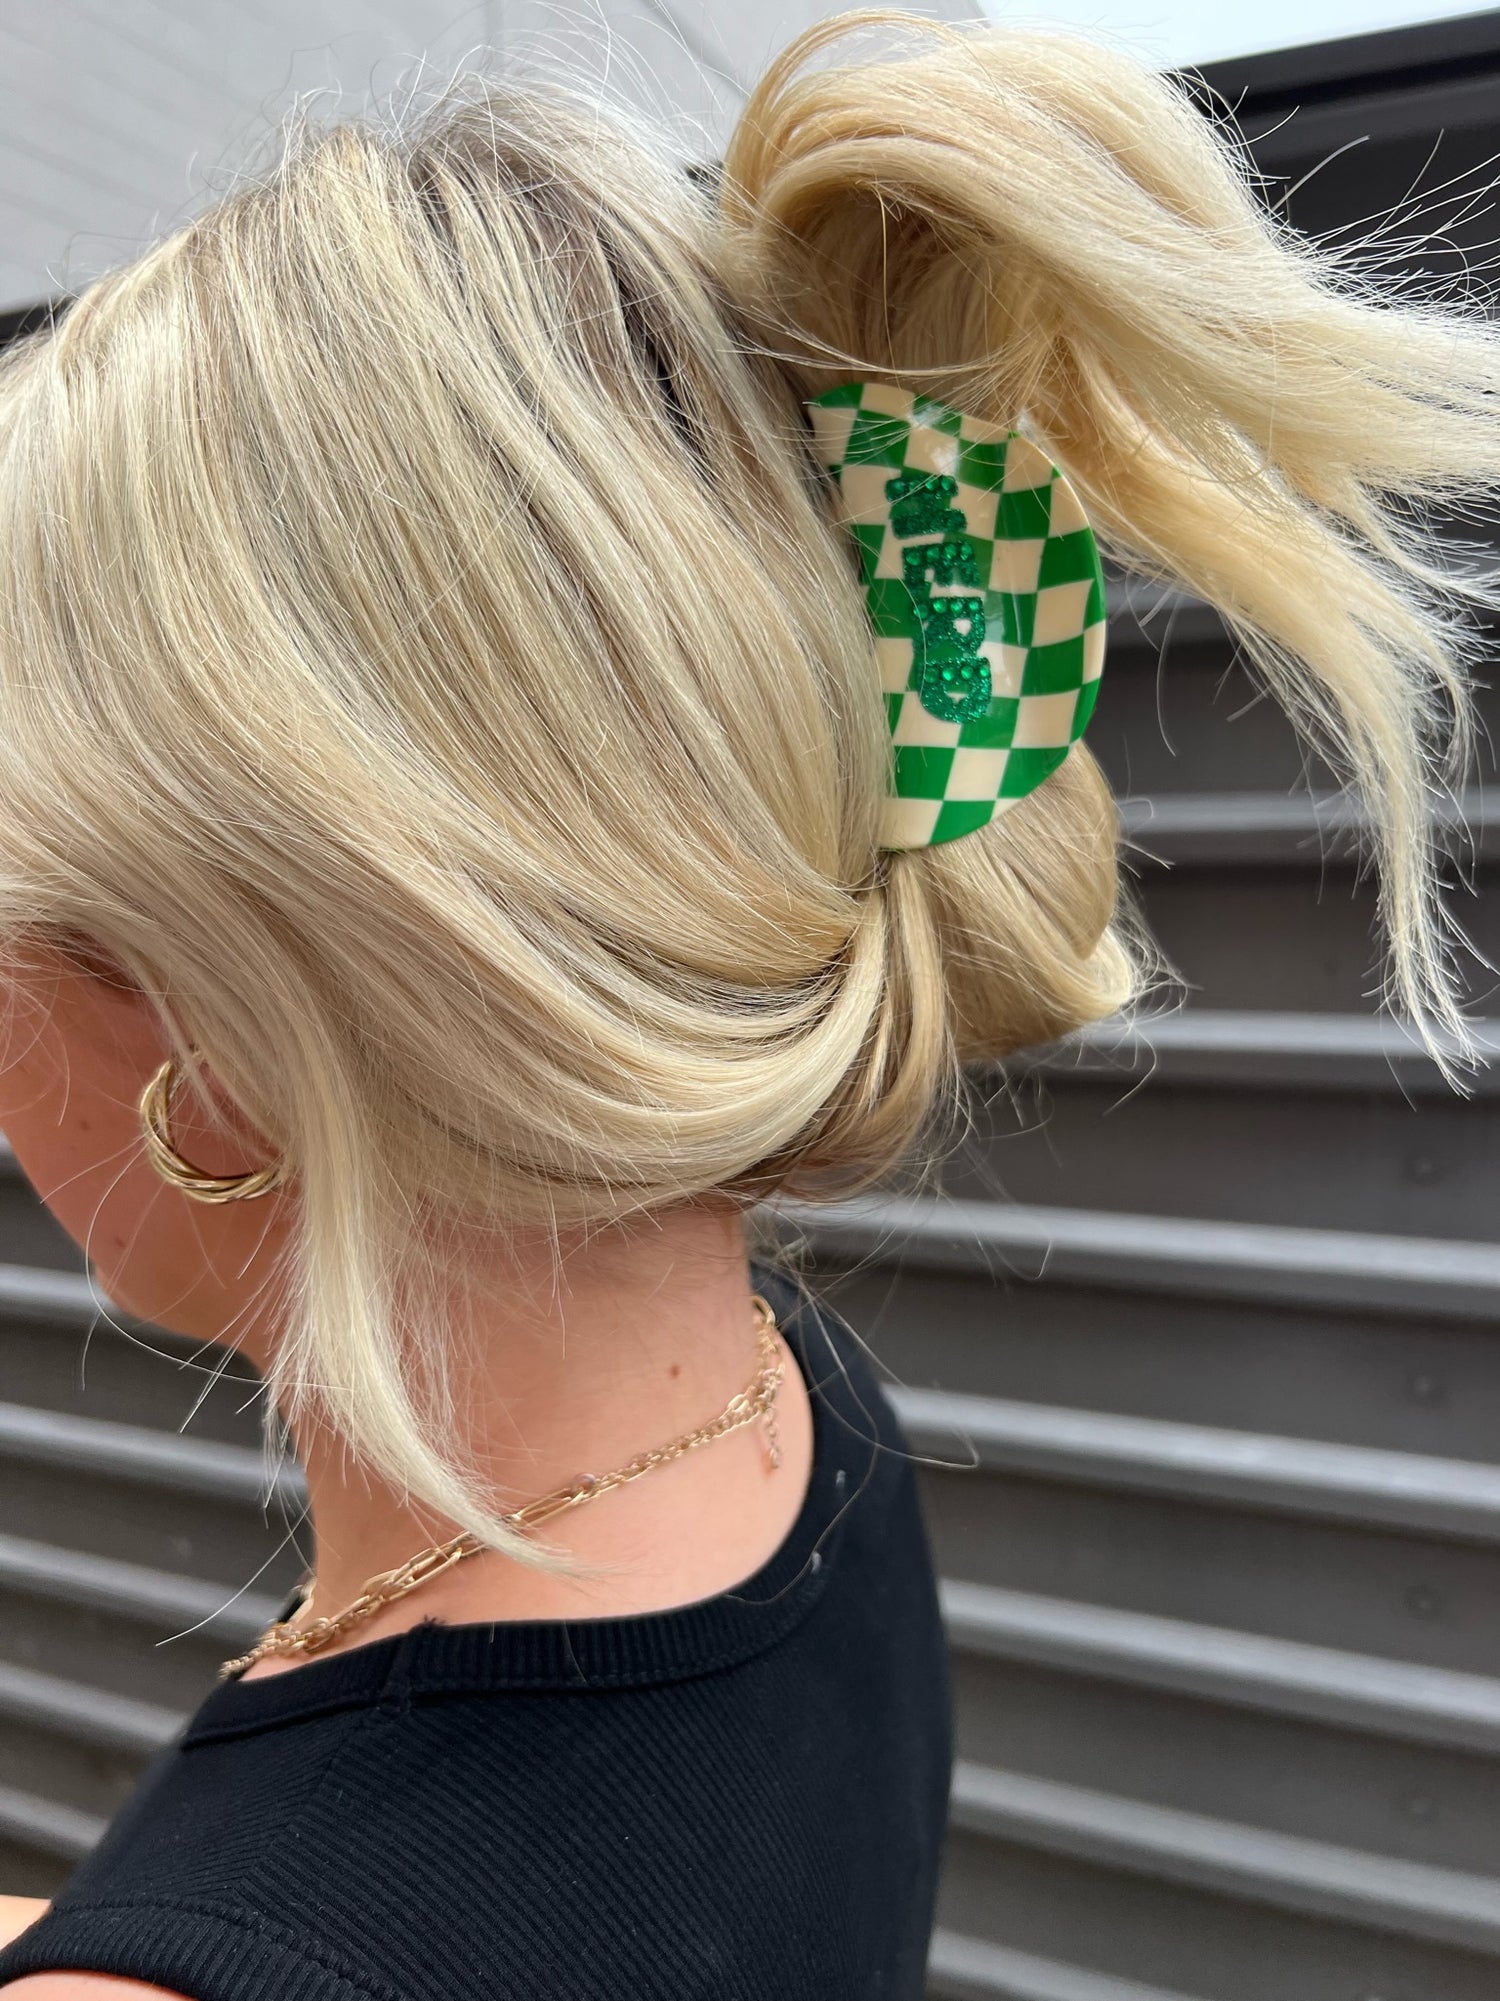 MARSHALL GAME DAY GREEN CHECKERED HAIR CLIP - THE HIP EAGLE BOUTIQUE 